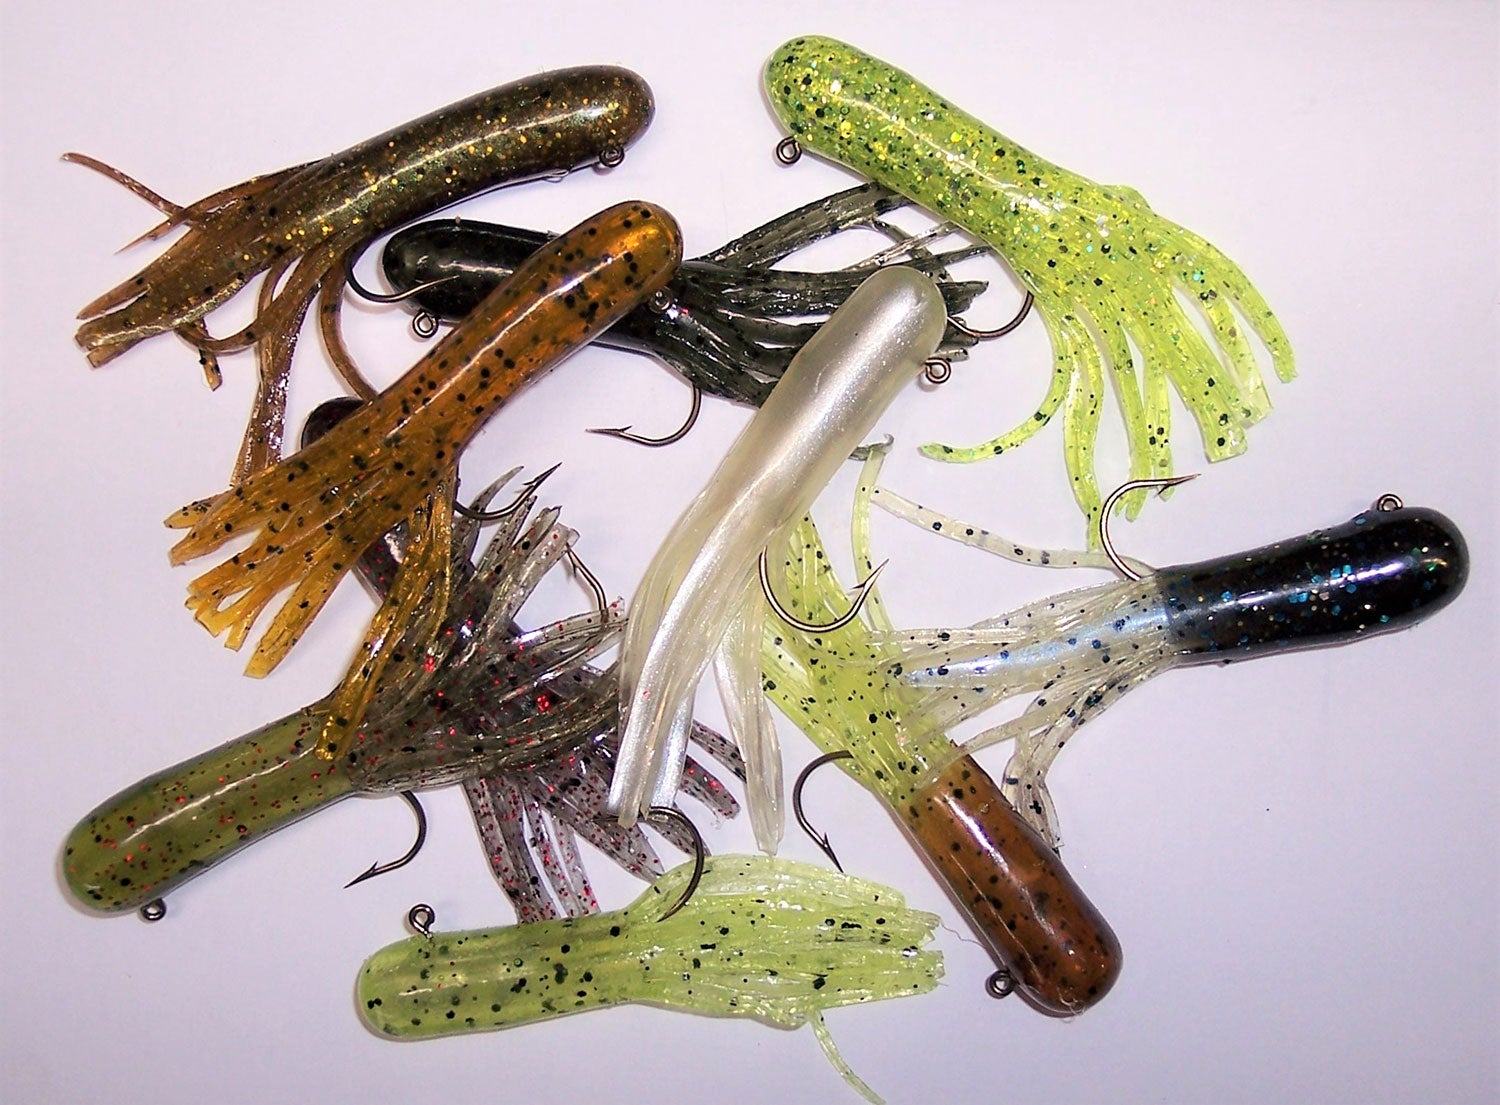 BLACK/CHARTREUSE SILVER GLITTER 20PK AWD BAITS 2" CRAPPIE DELIGHTS CD6 